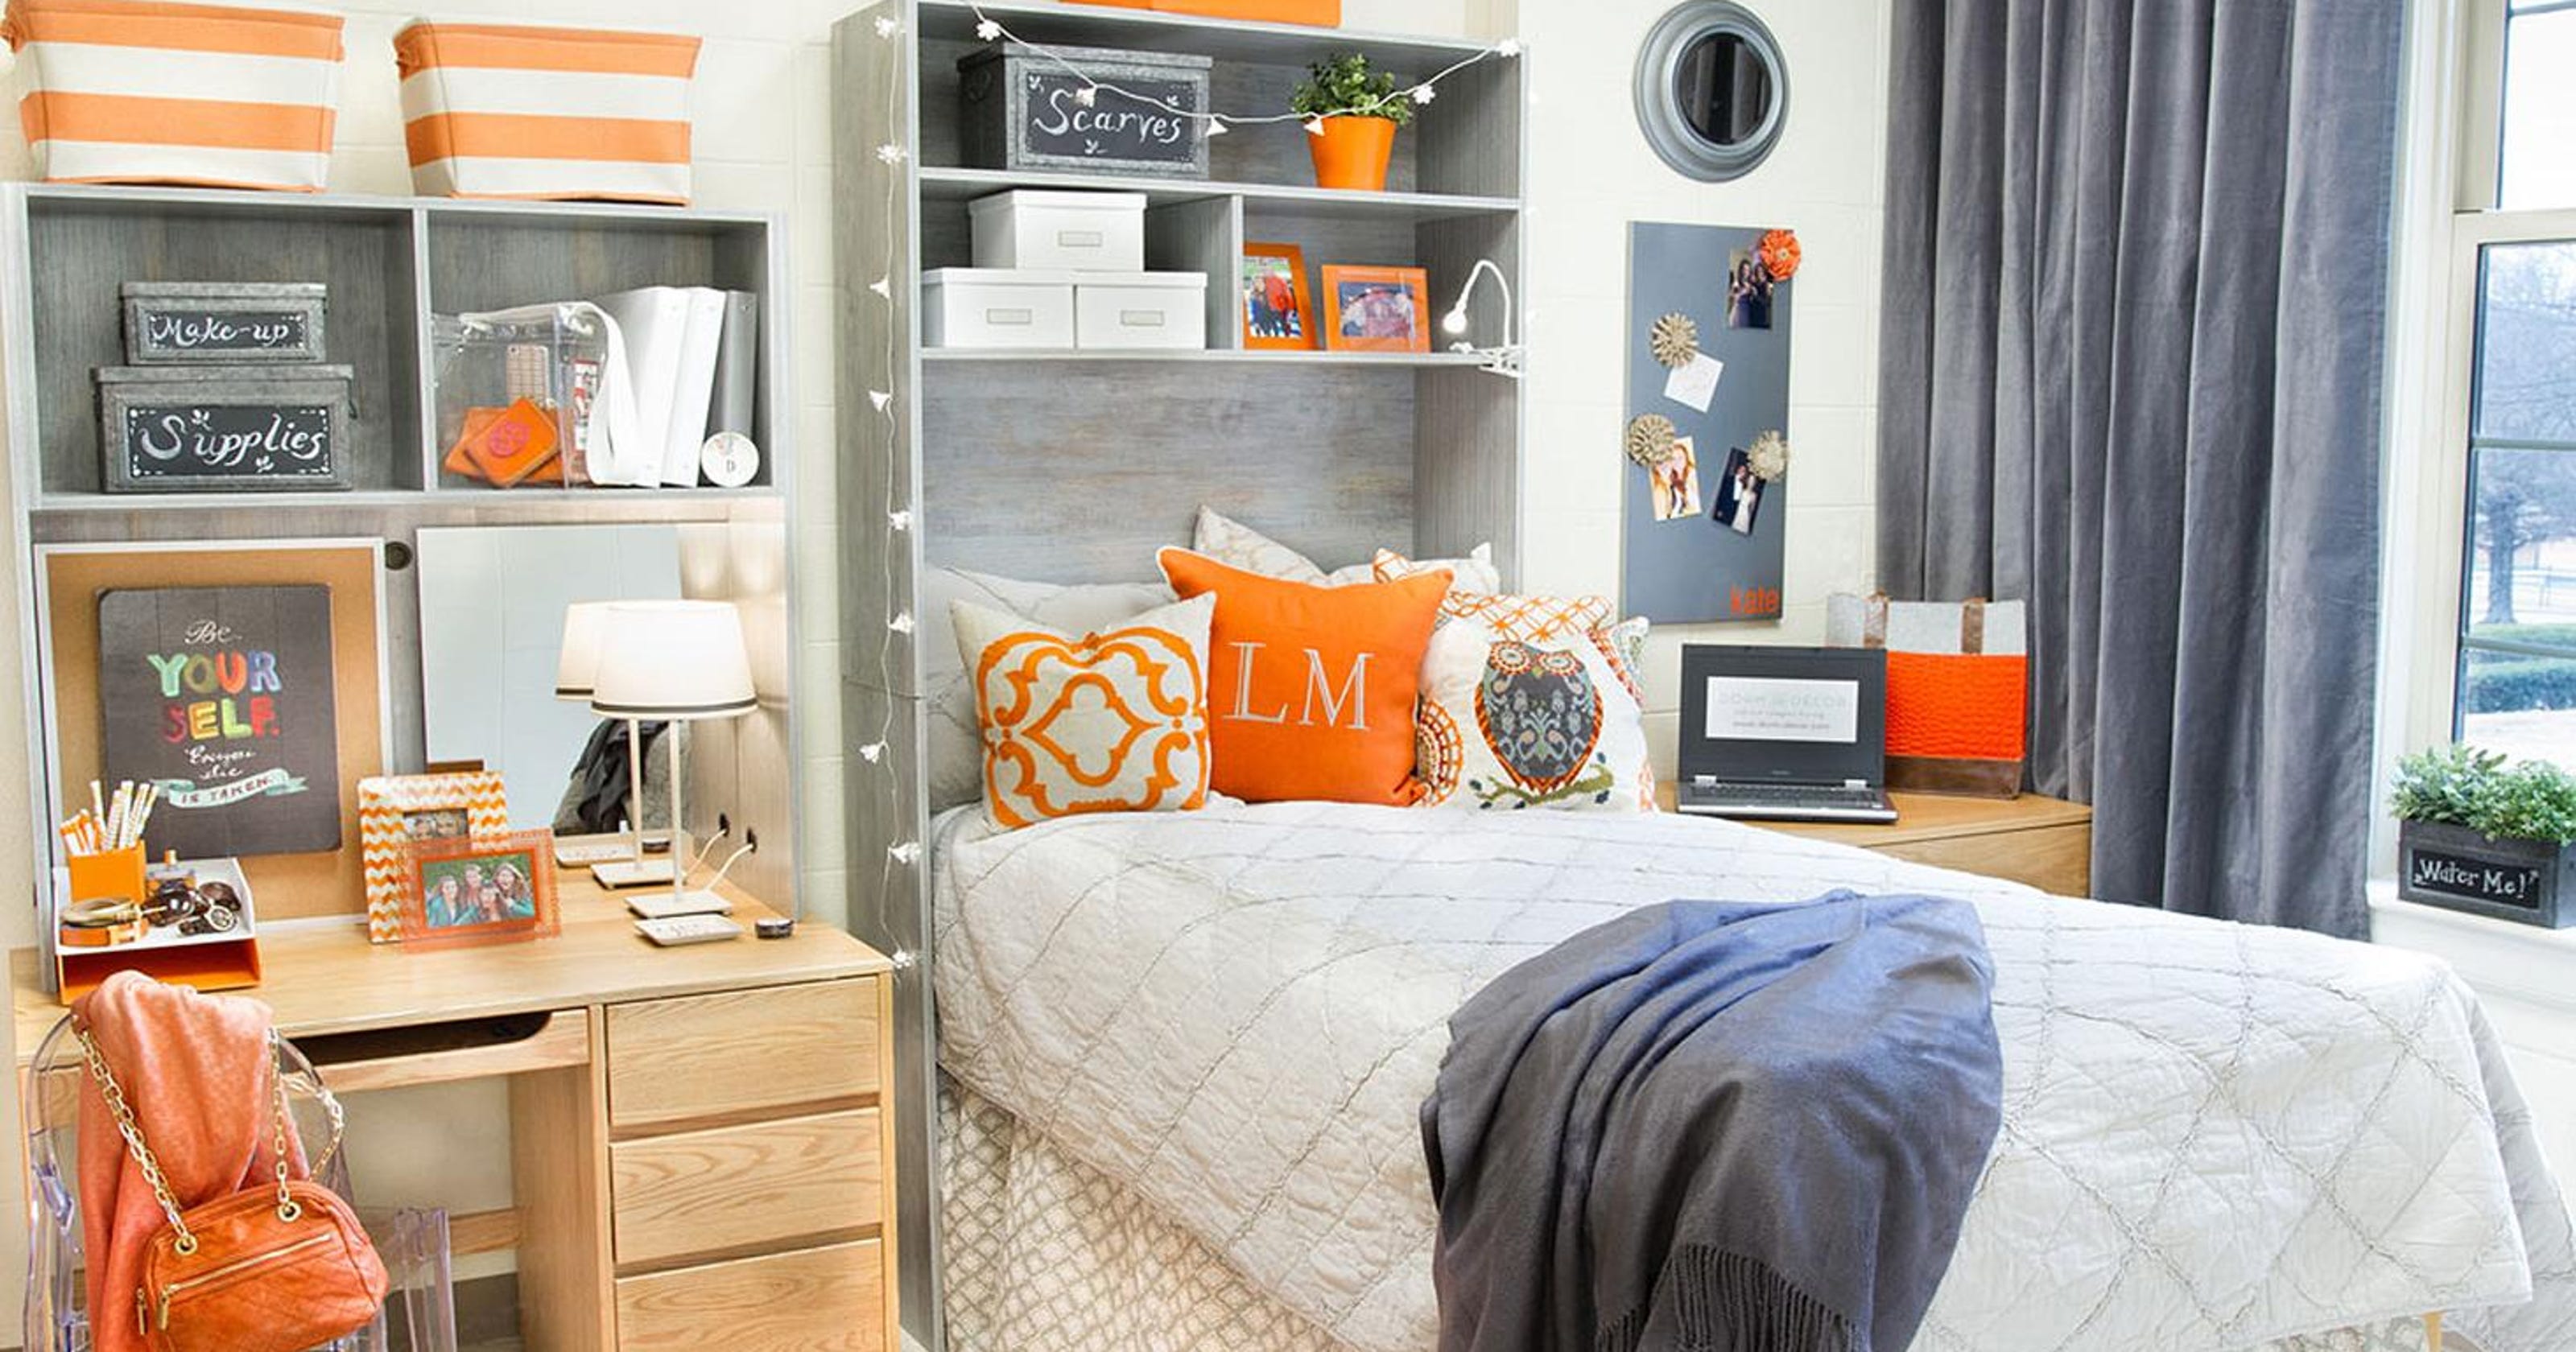 Best tips for decorating dorm rooms with style, storage